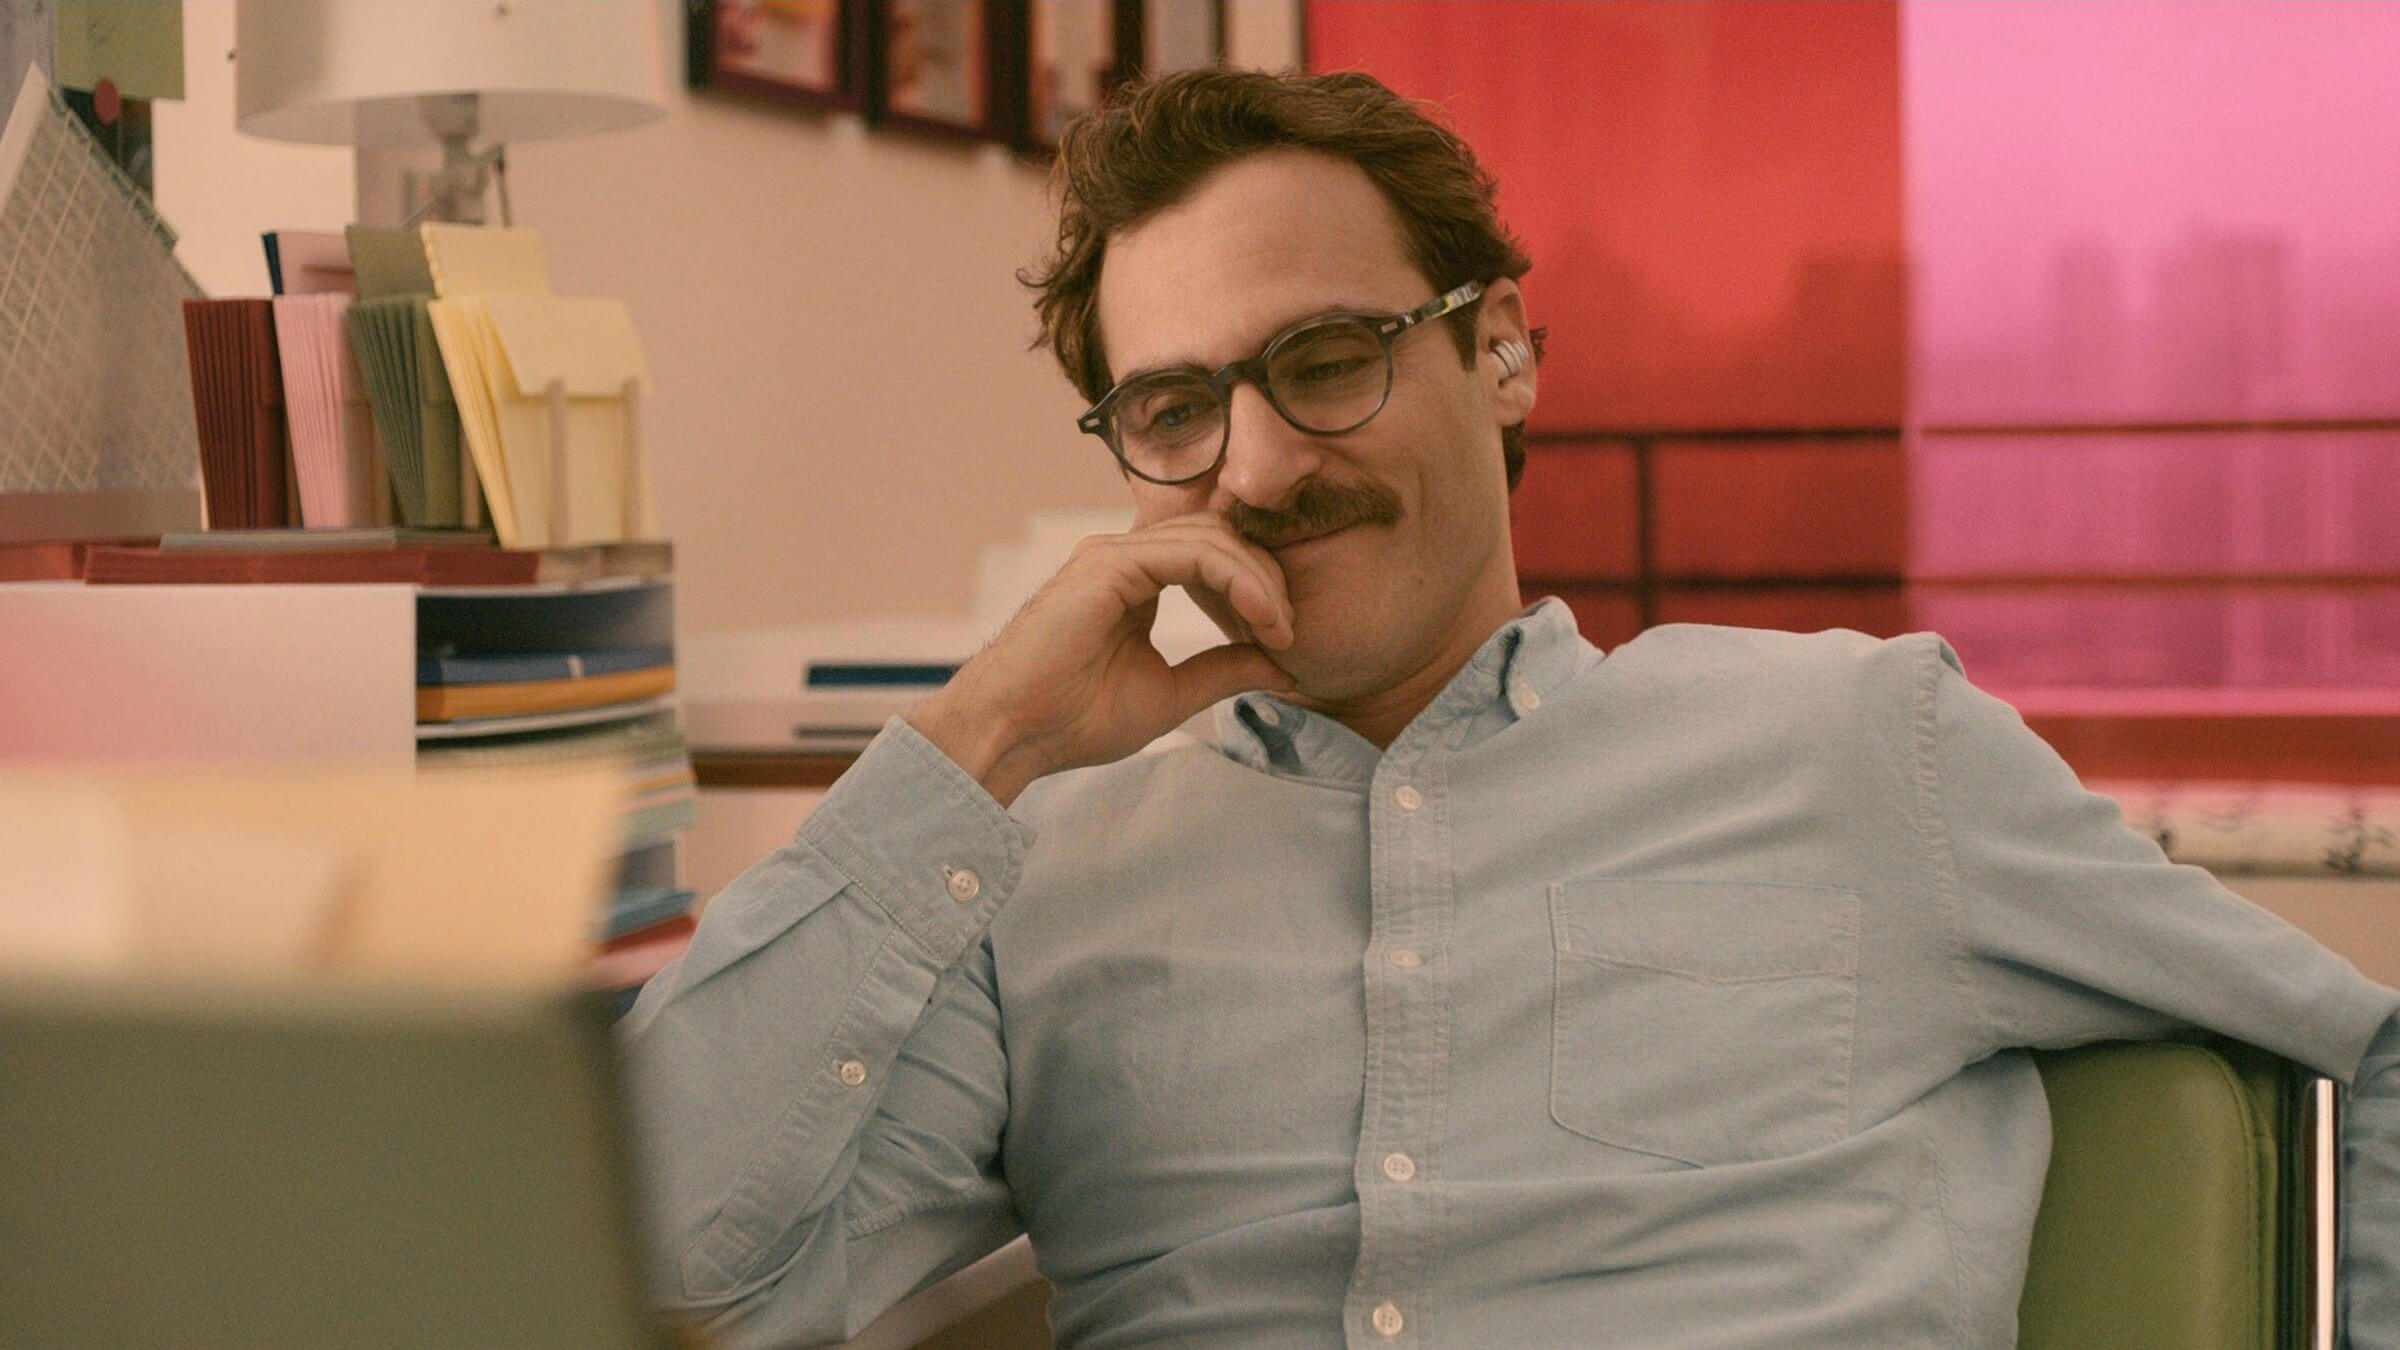 Joaquin Phoenix in a blue shirt in glasses sitting down looking at a monitor.